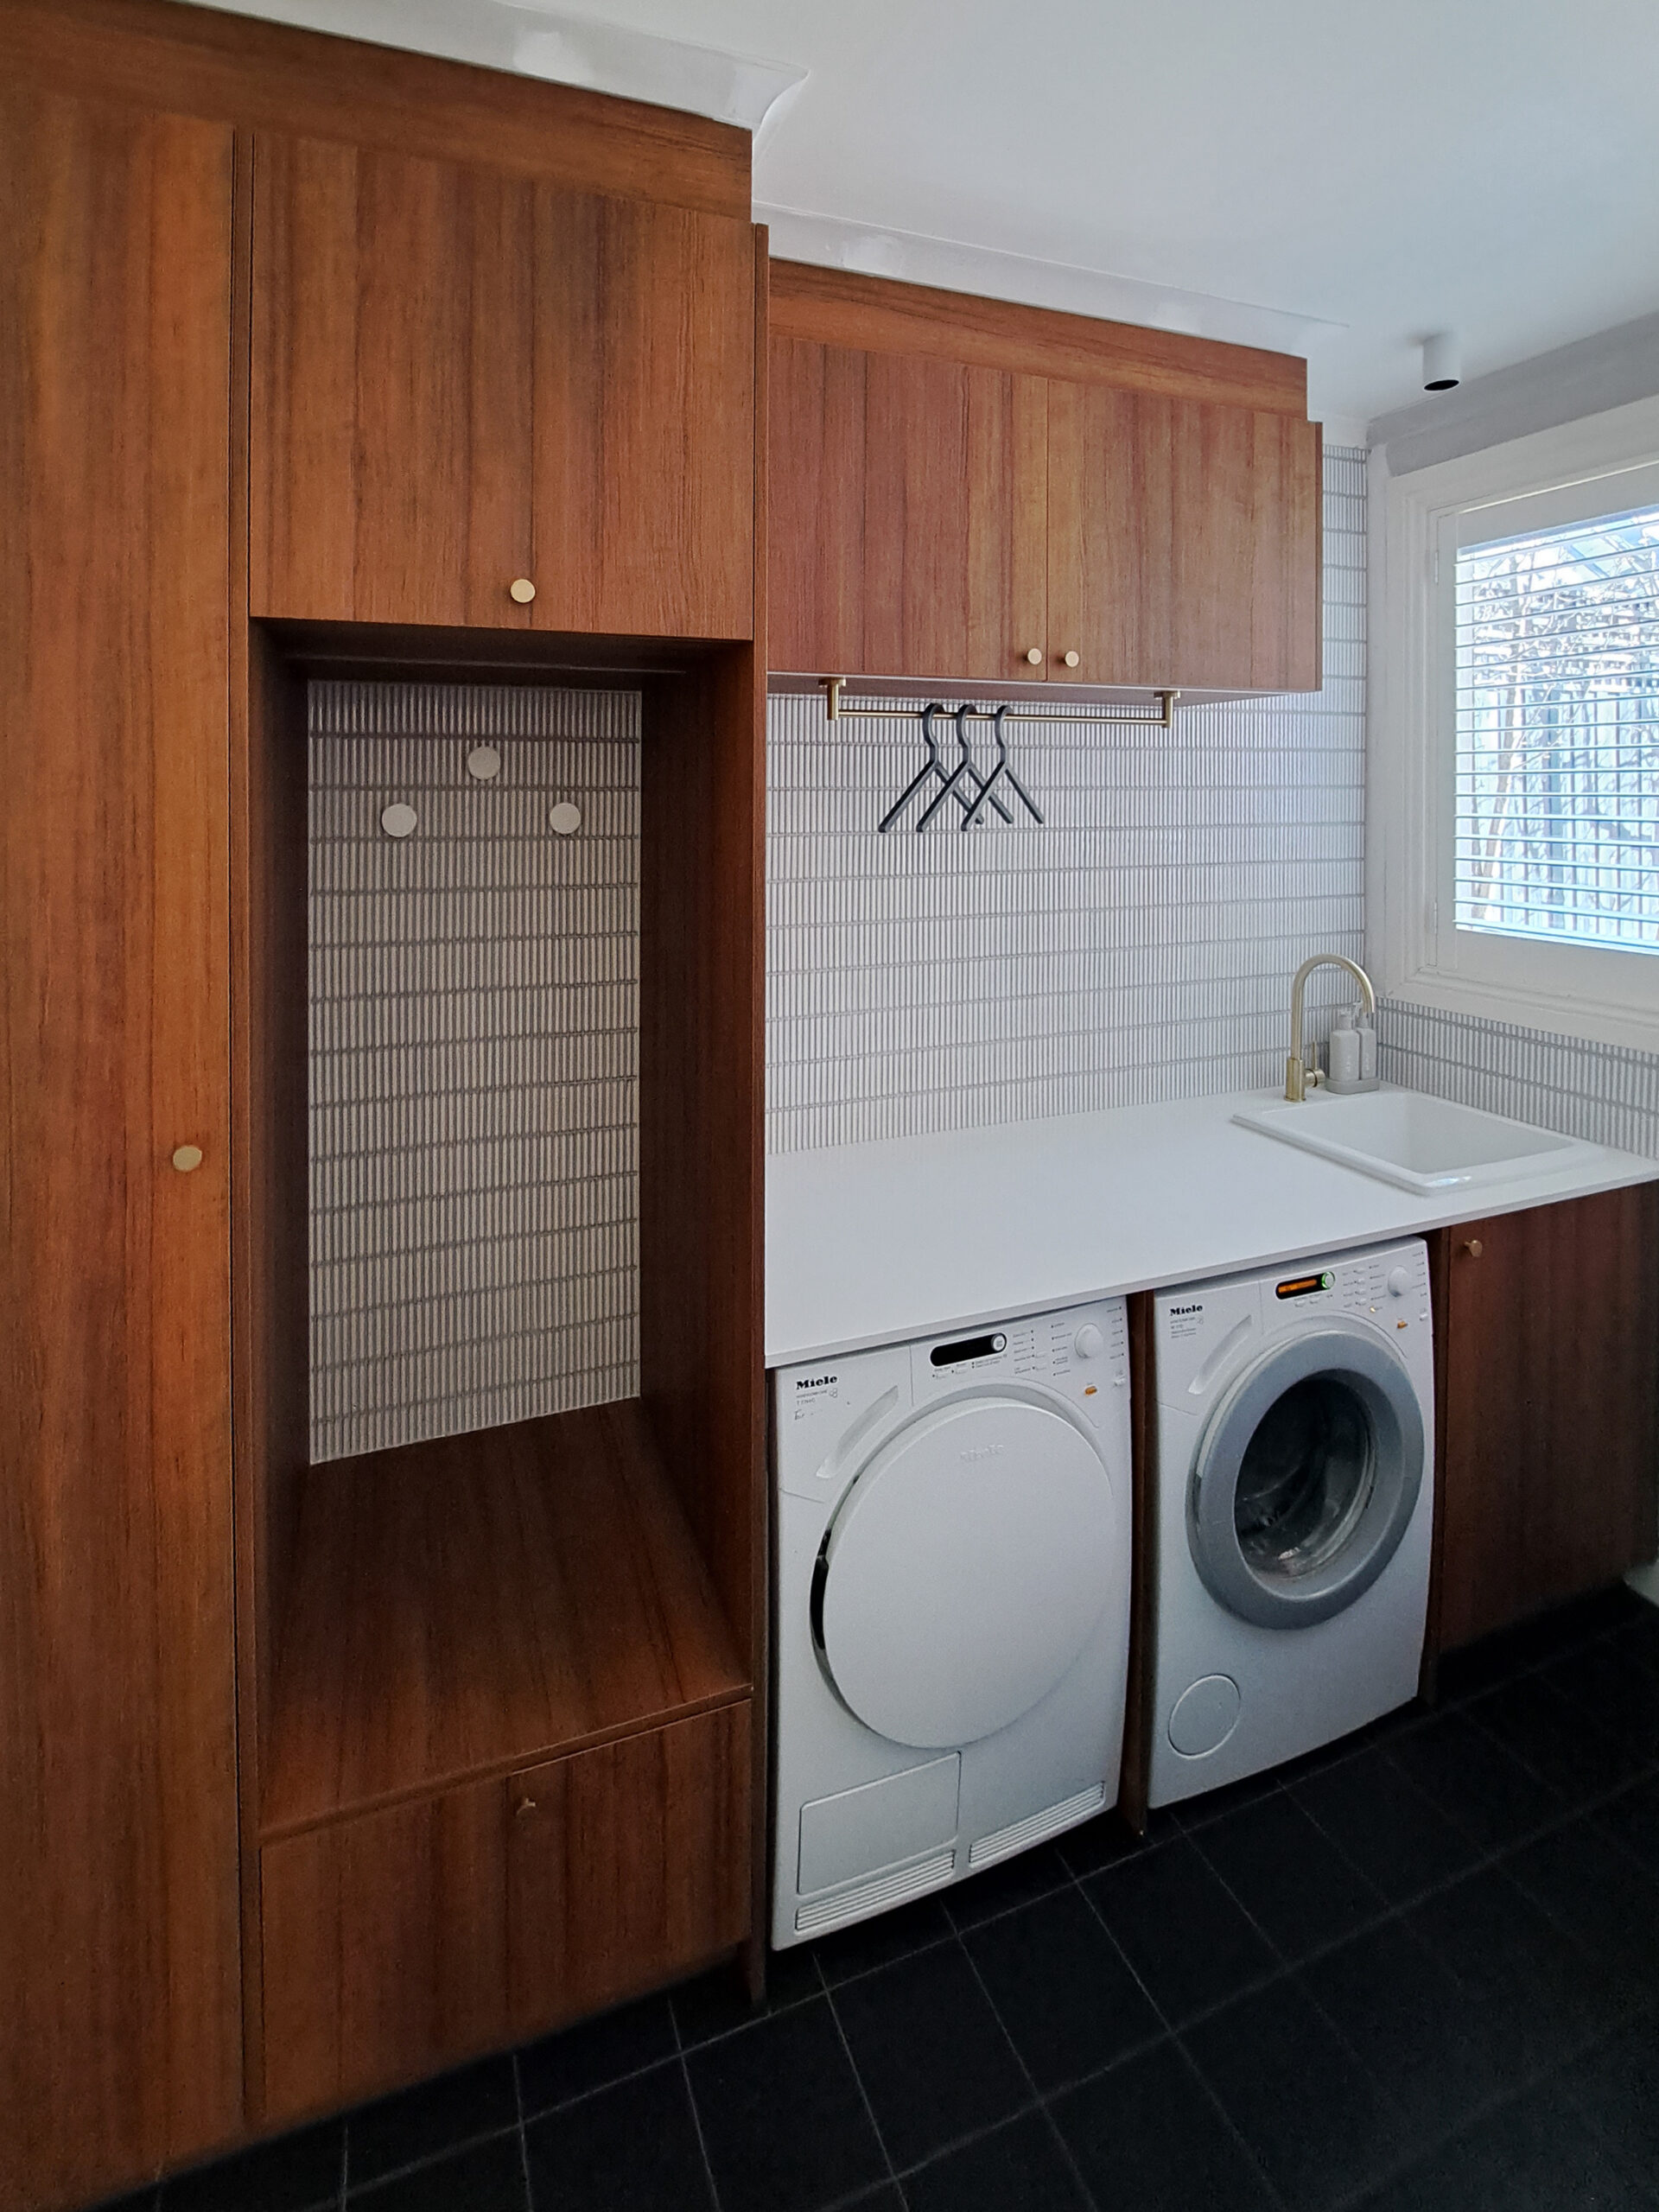 Timber laundry cabinetry with under bench washing machine and dryer